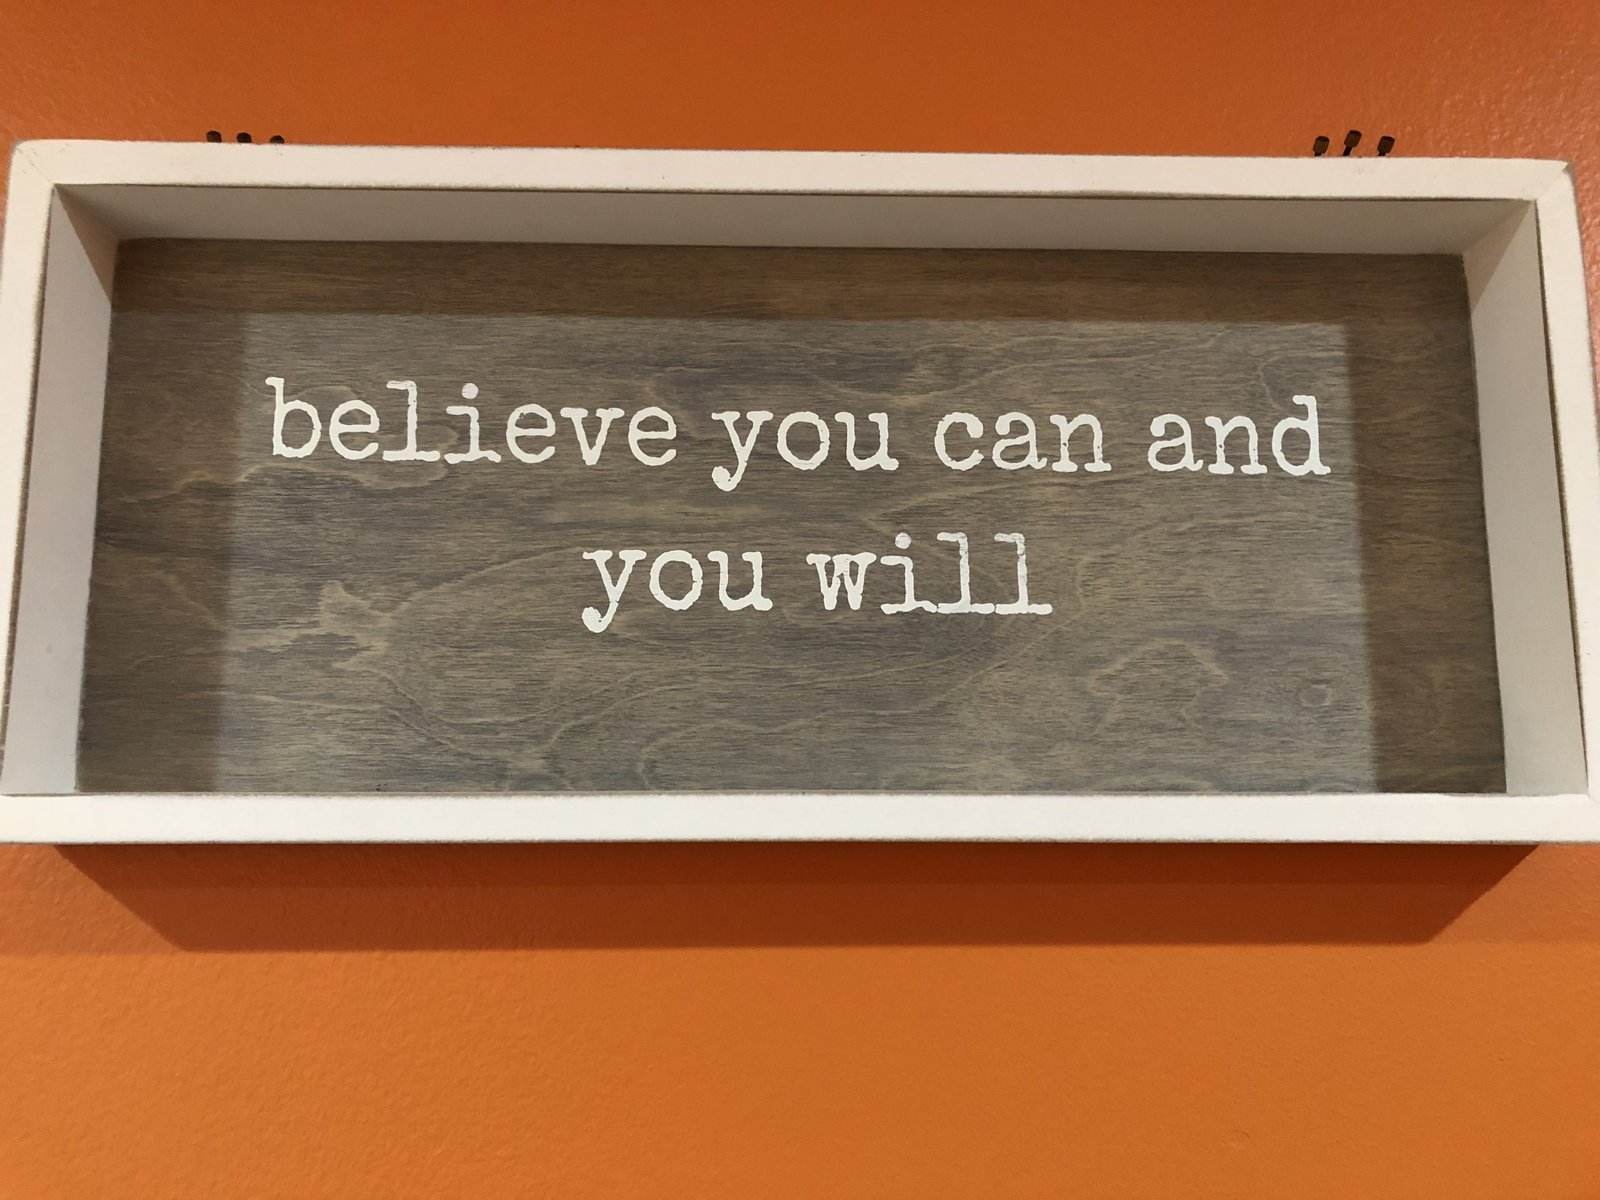 Believe you can and you will